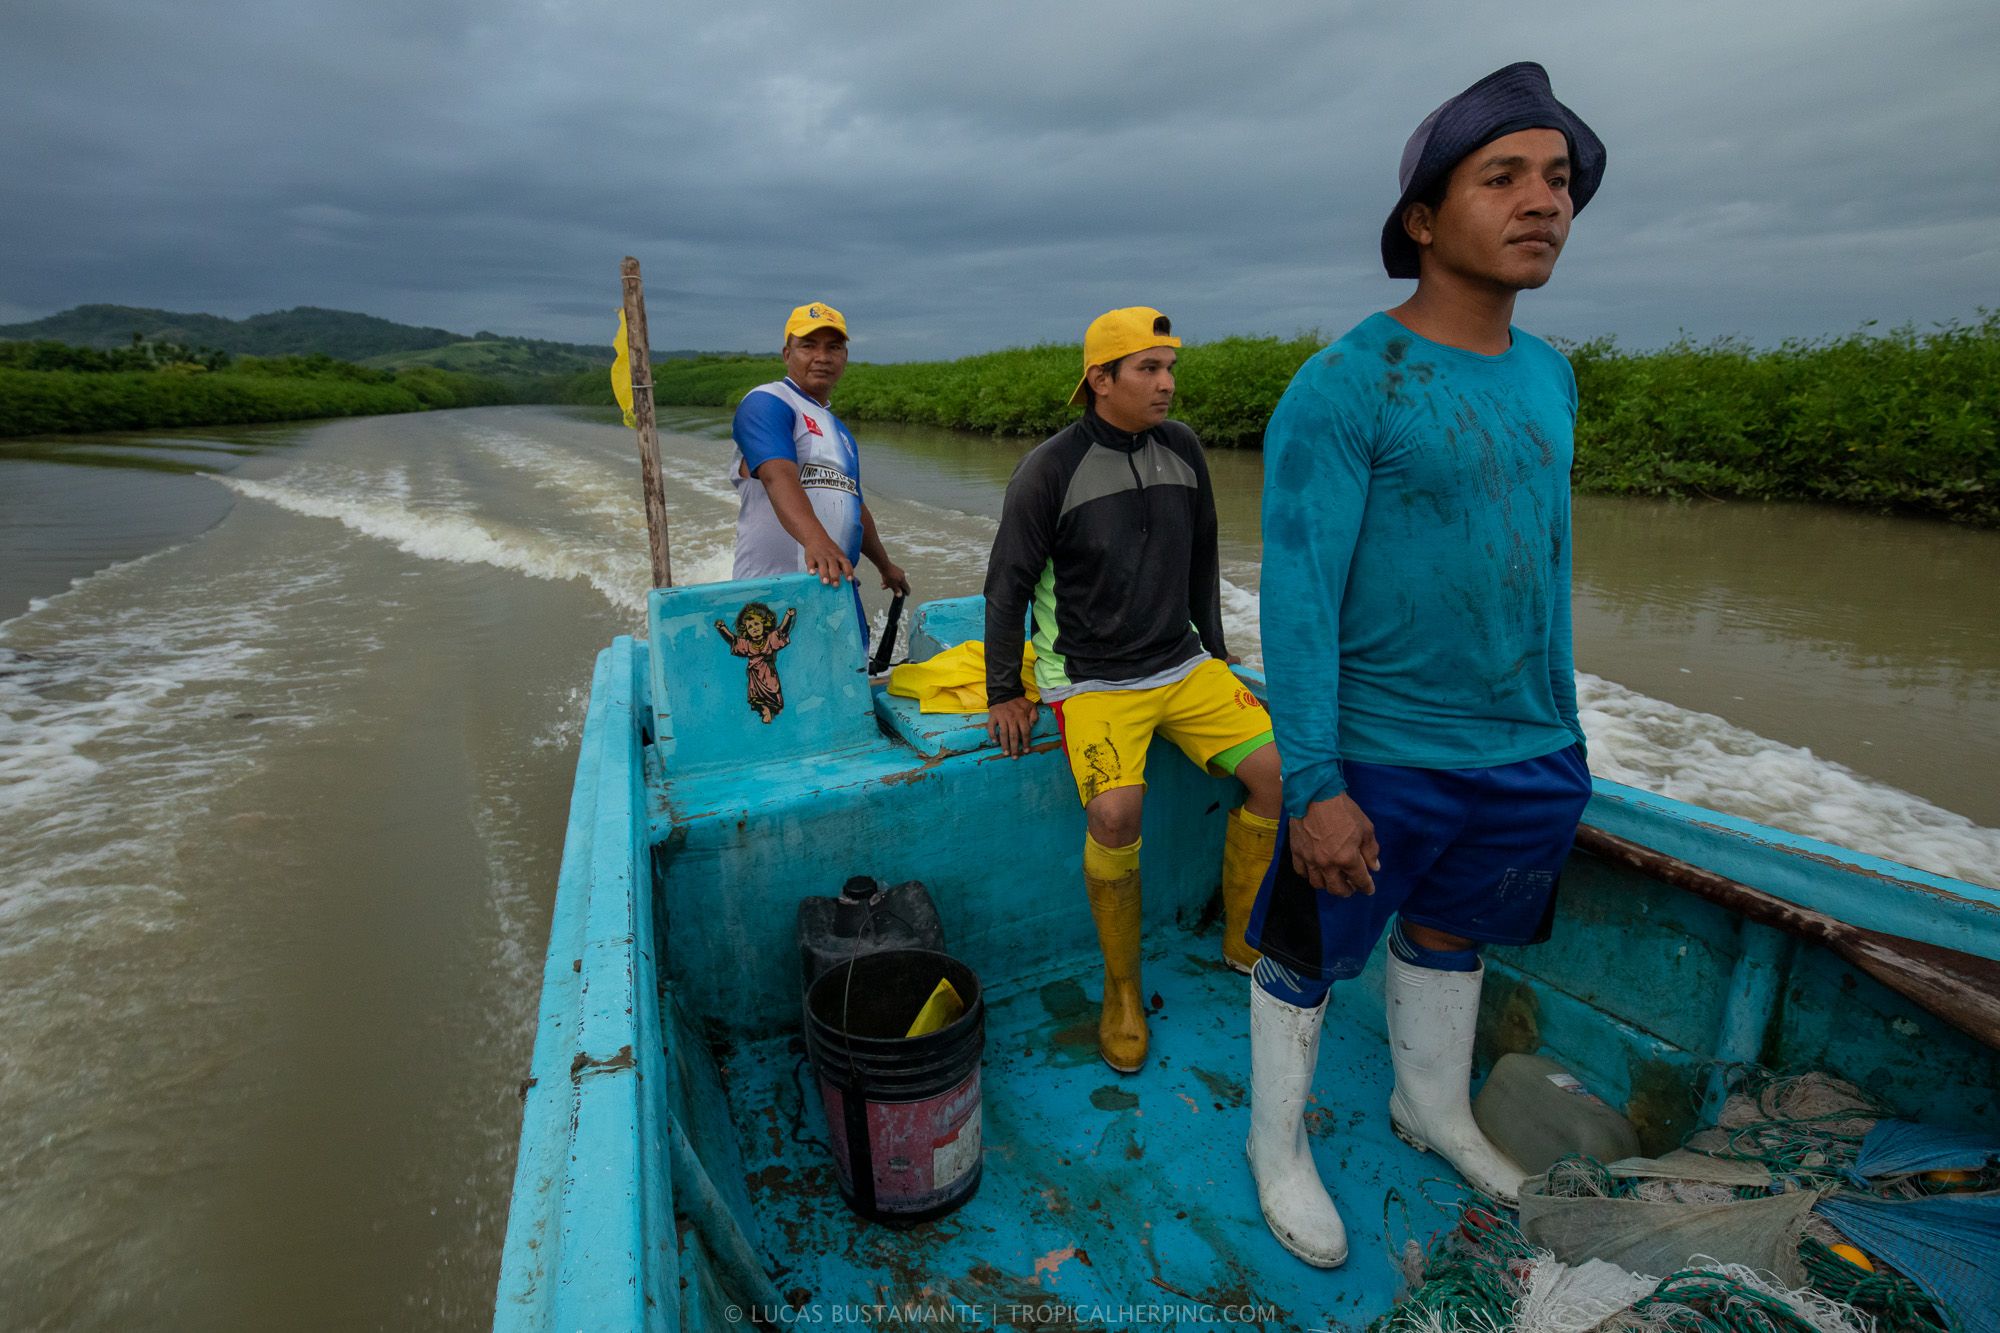 Artisanal fishers sail early in the morning on the Ecuadorian coast..